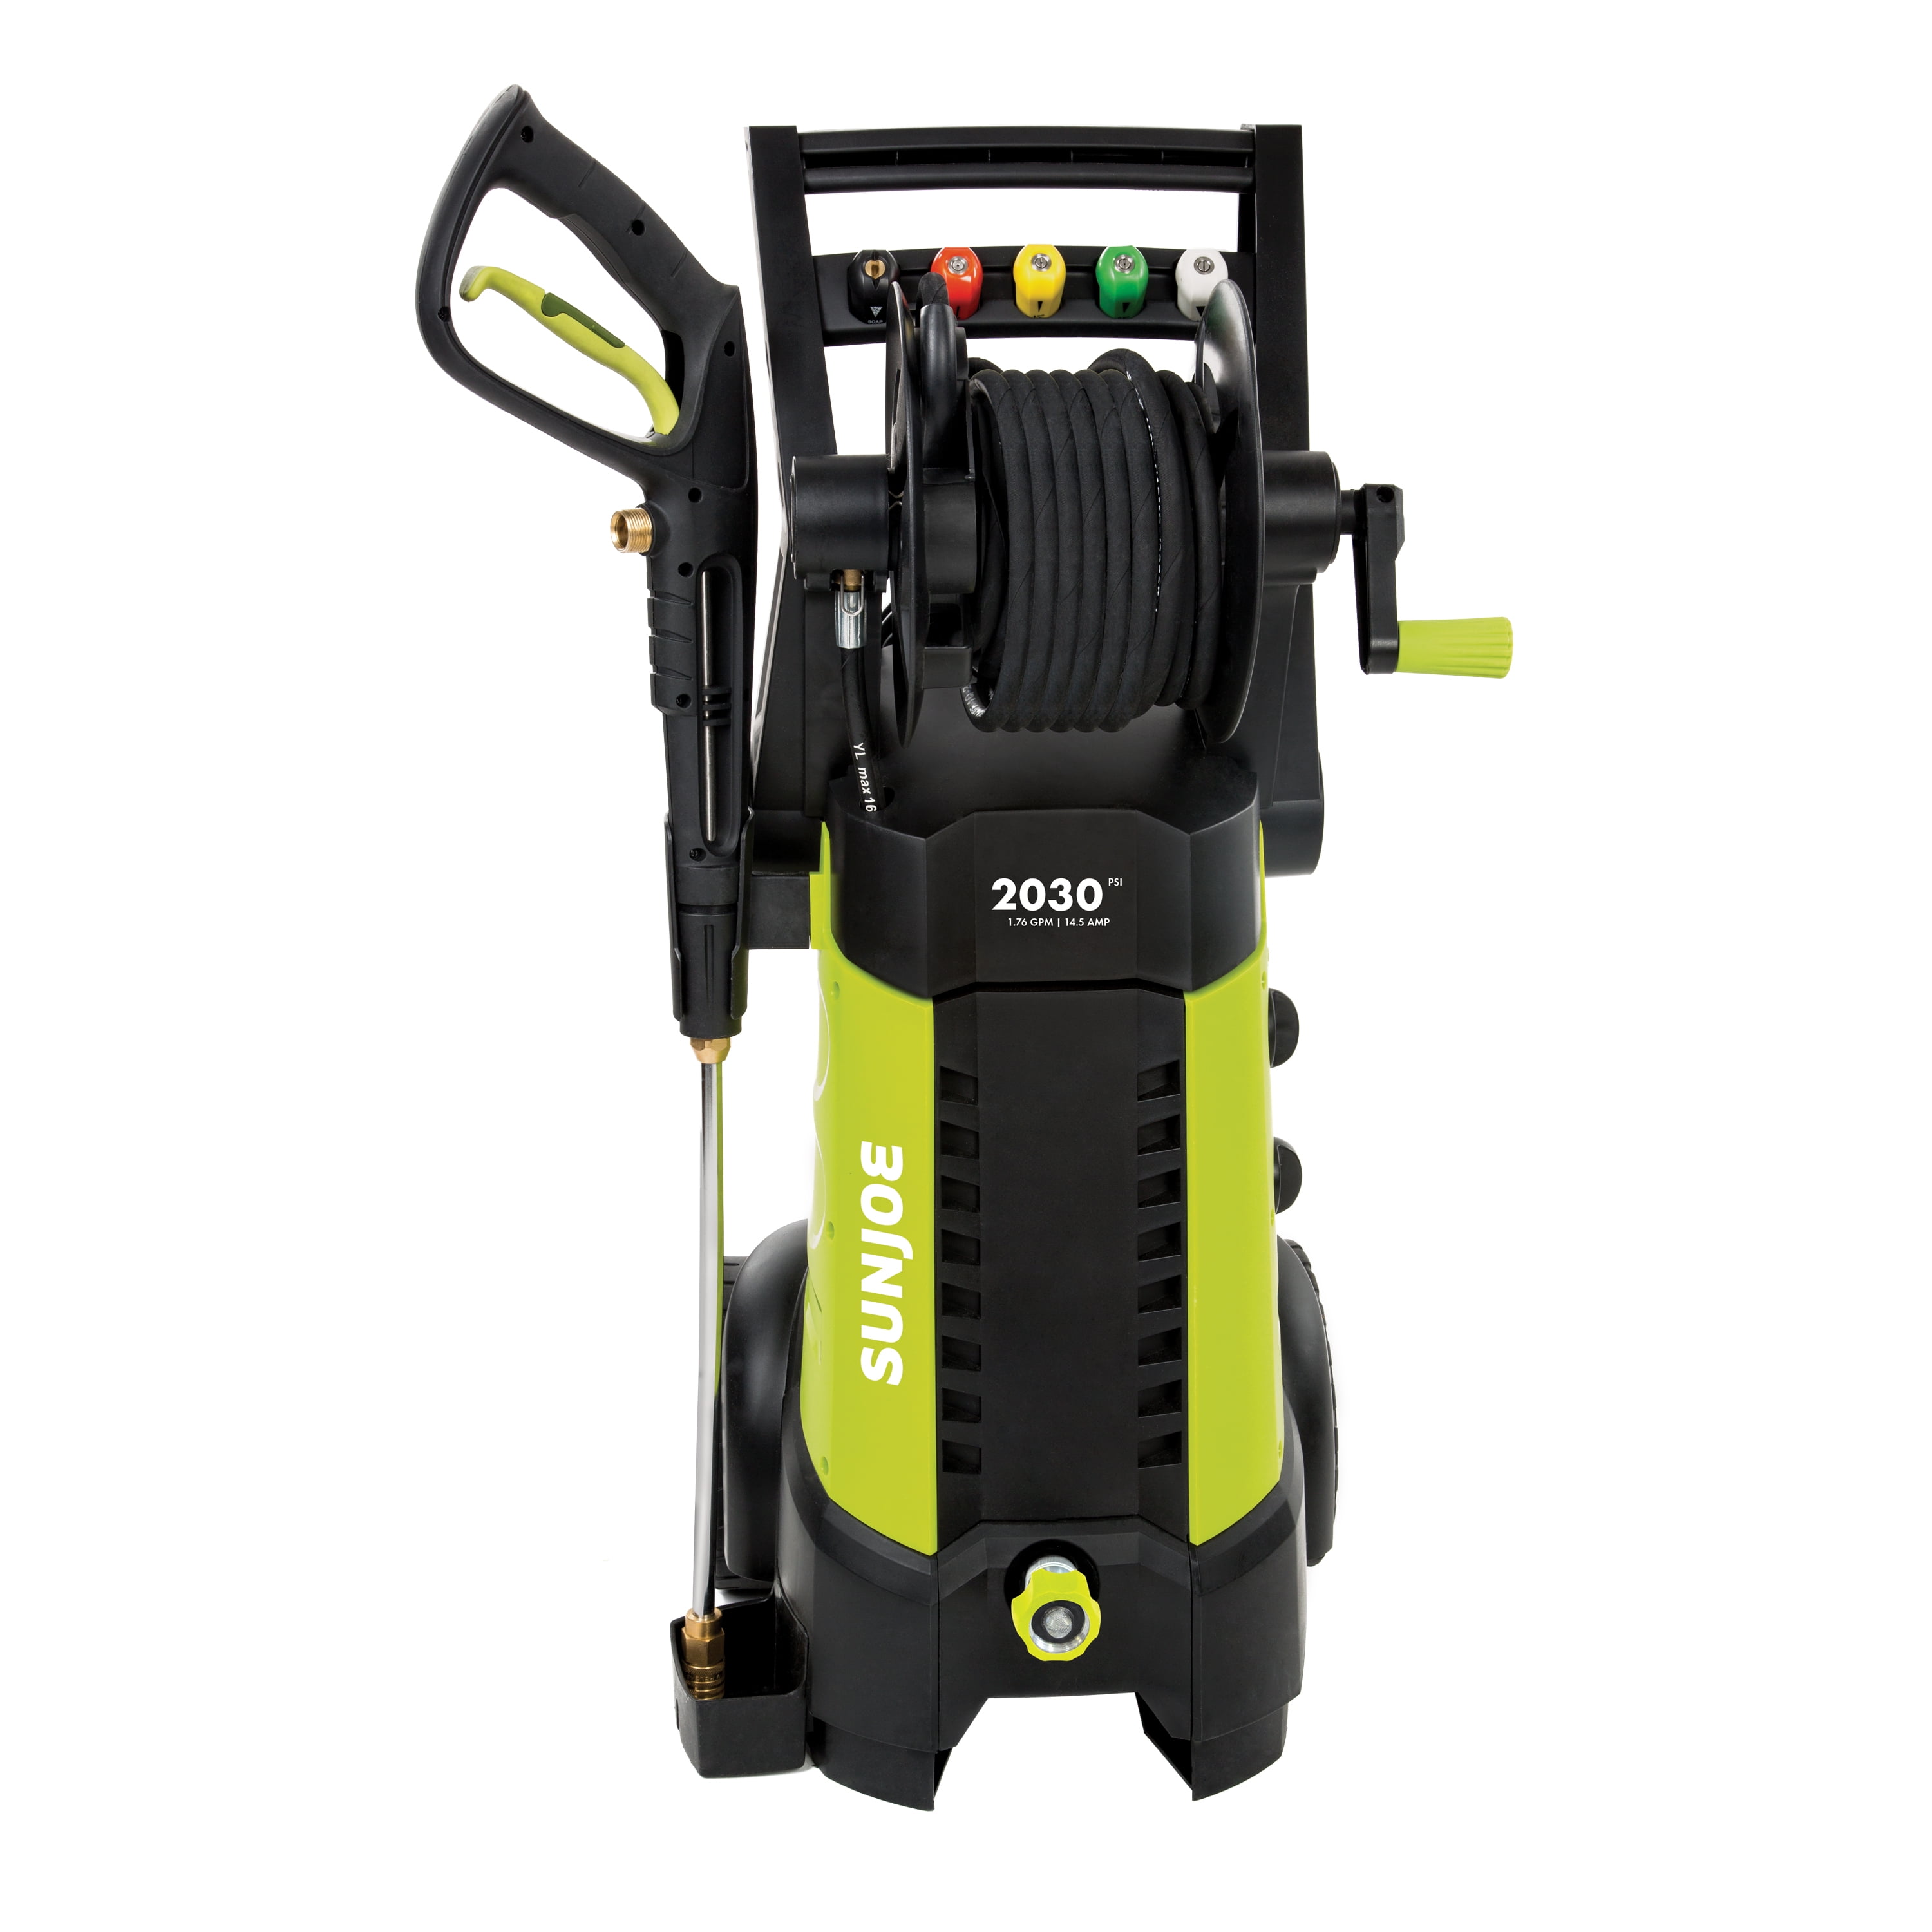 Sun Joe Electric Pressure Washer, 14.5-Amp, Hose Reel, Quick-Connect Tips - image 1 of 22